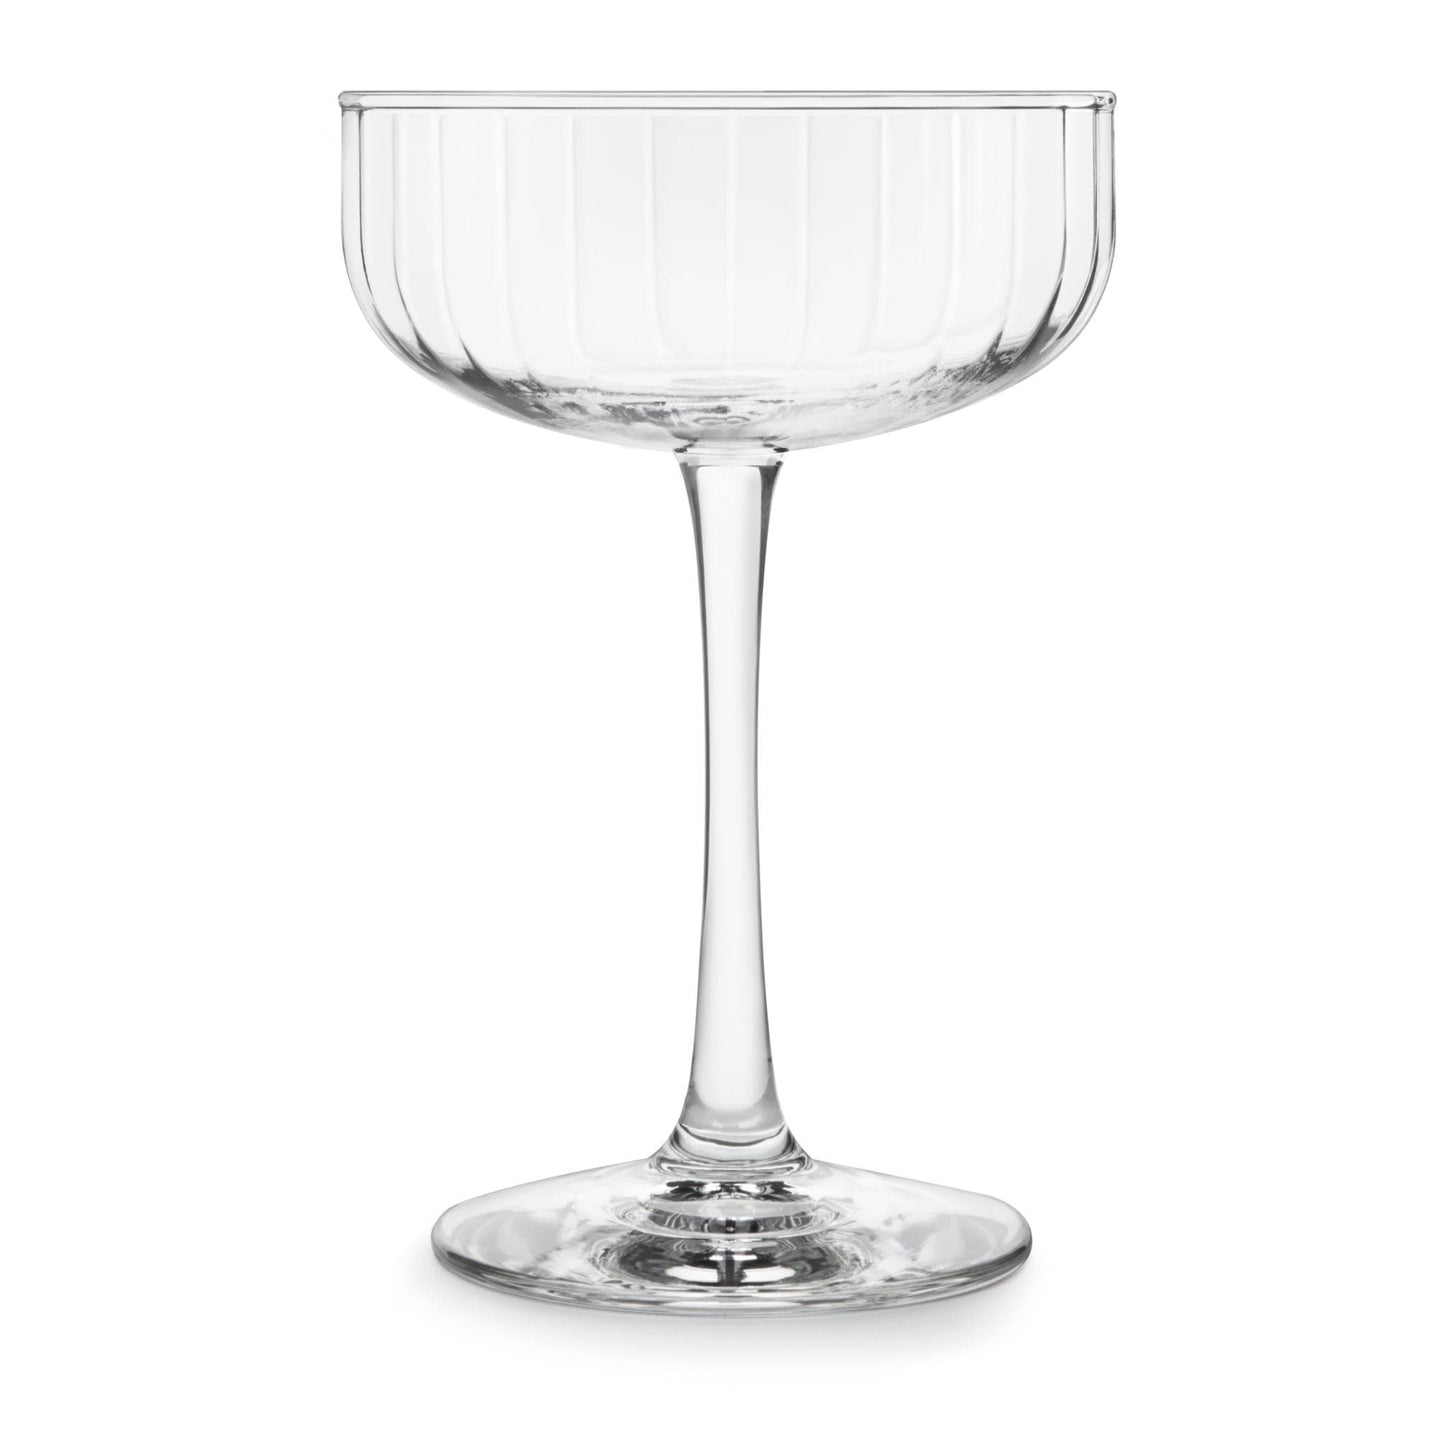 Libbey Paneled Coupe Cocktail Glasses, 8.5-ounce